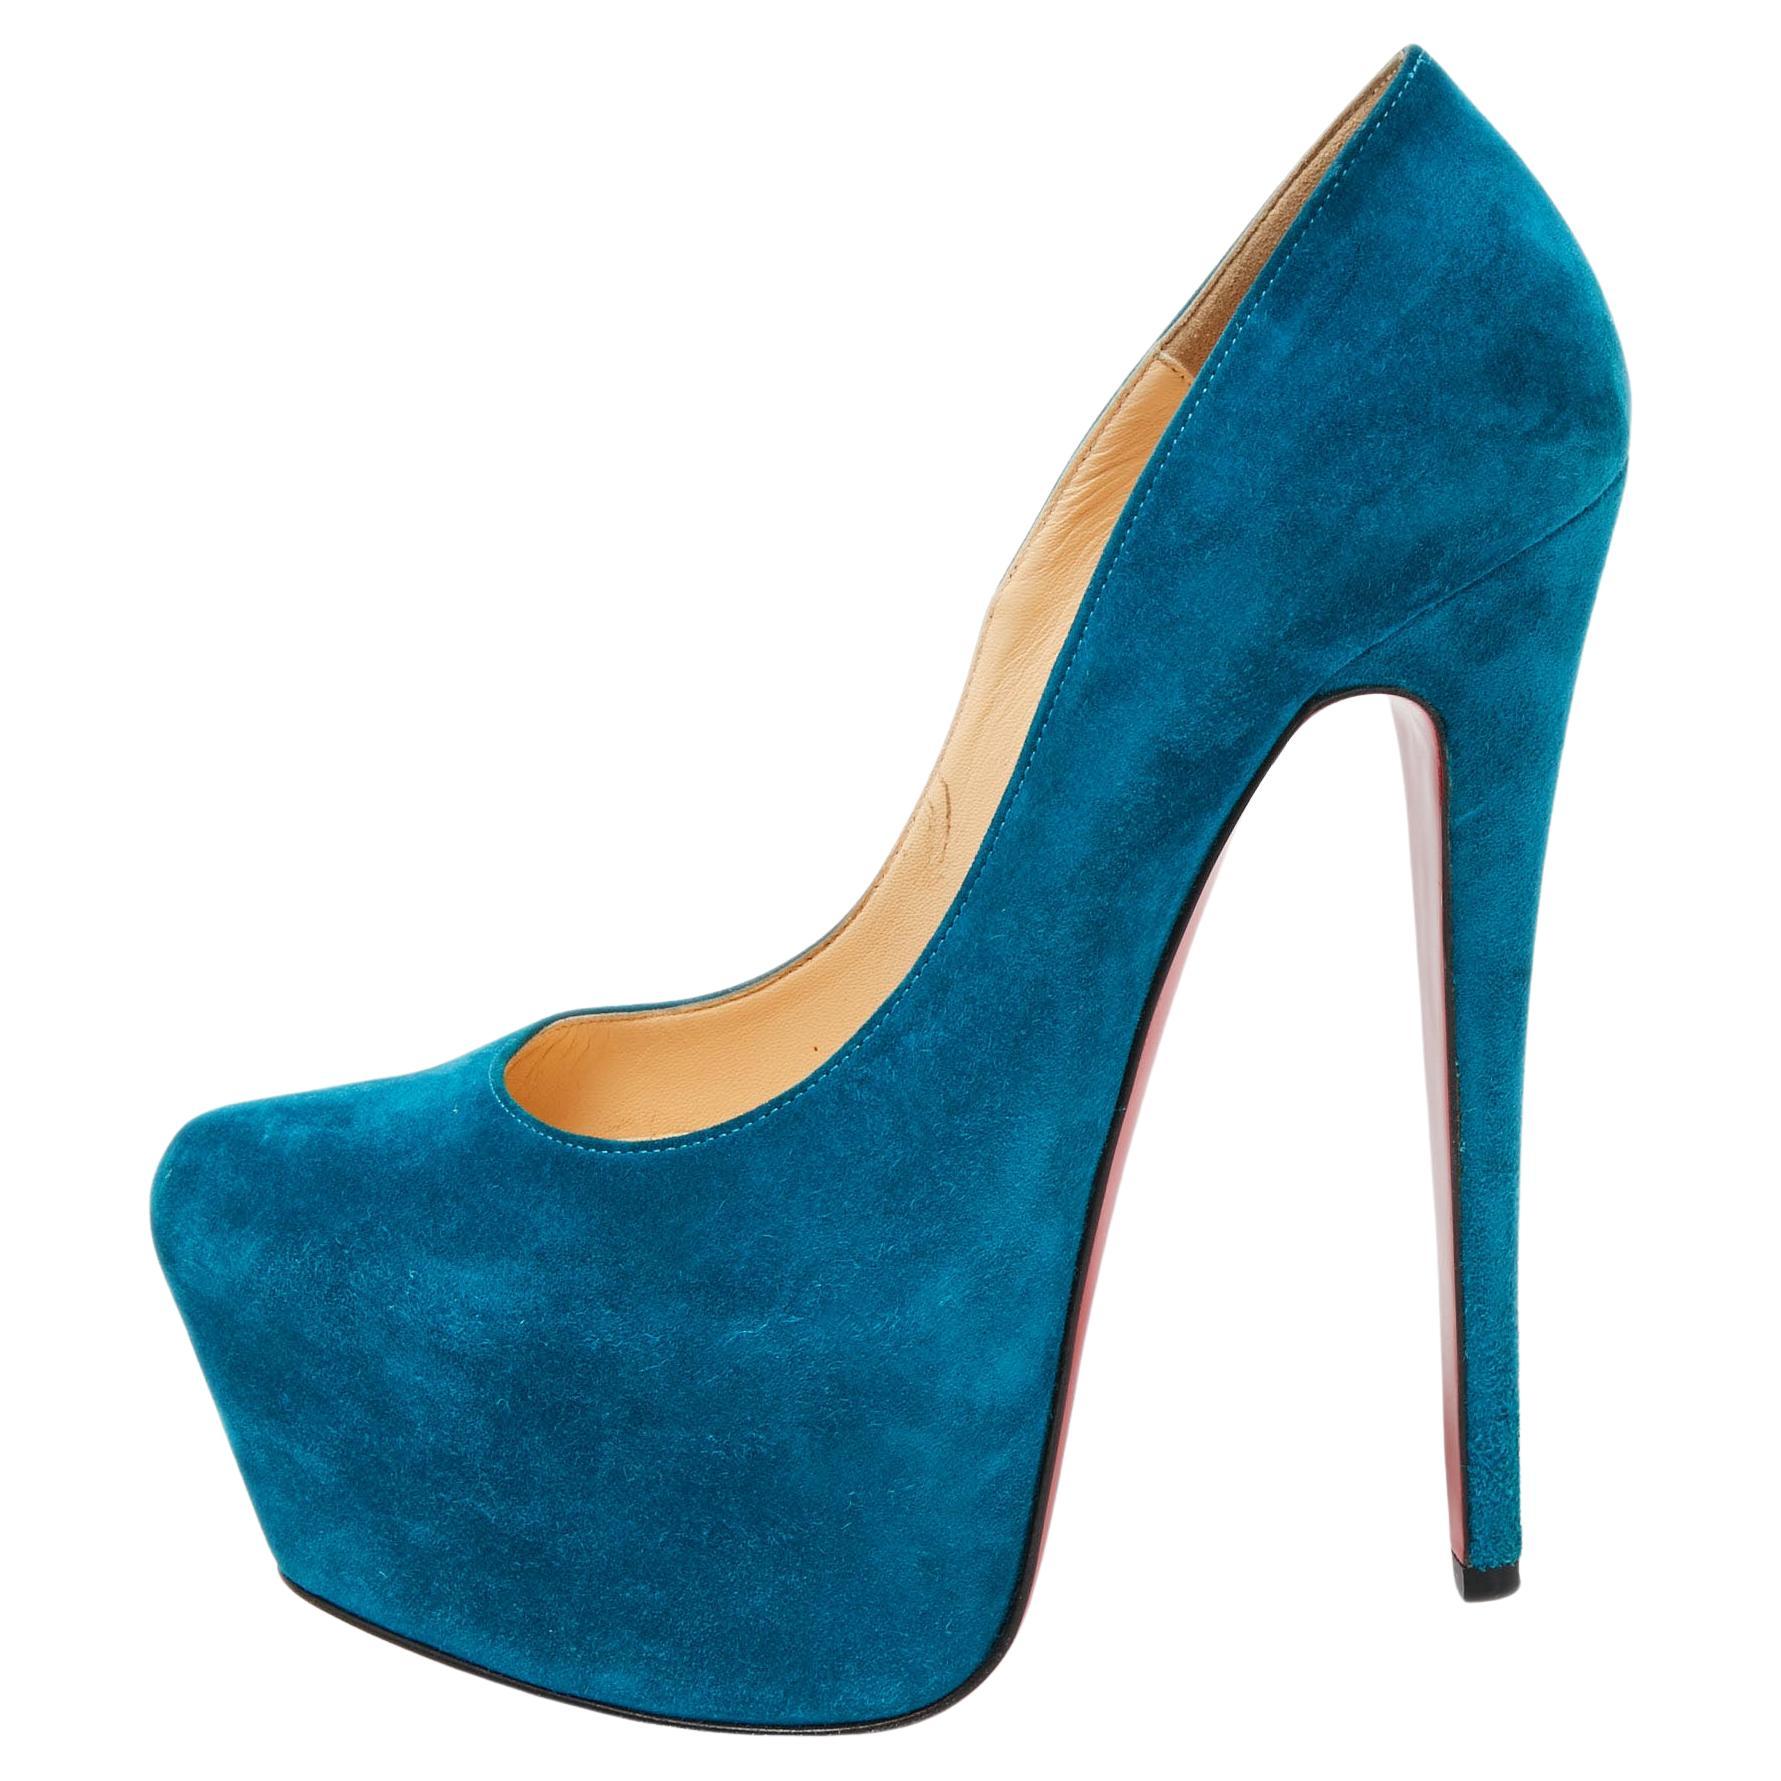 Christian Louboutin Teal Blue Suede Daffodile Platform Pumps Size 36.5 For Sale